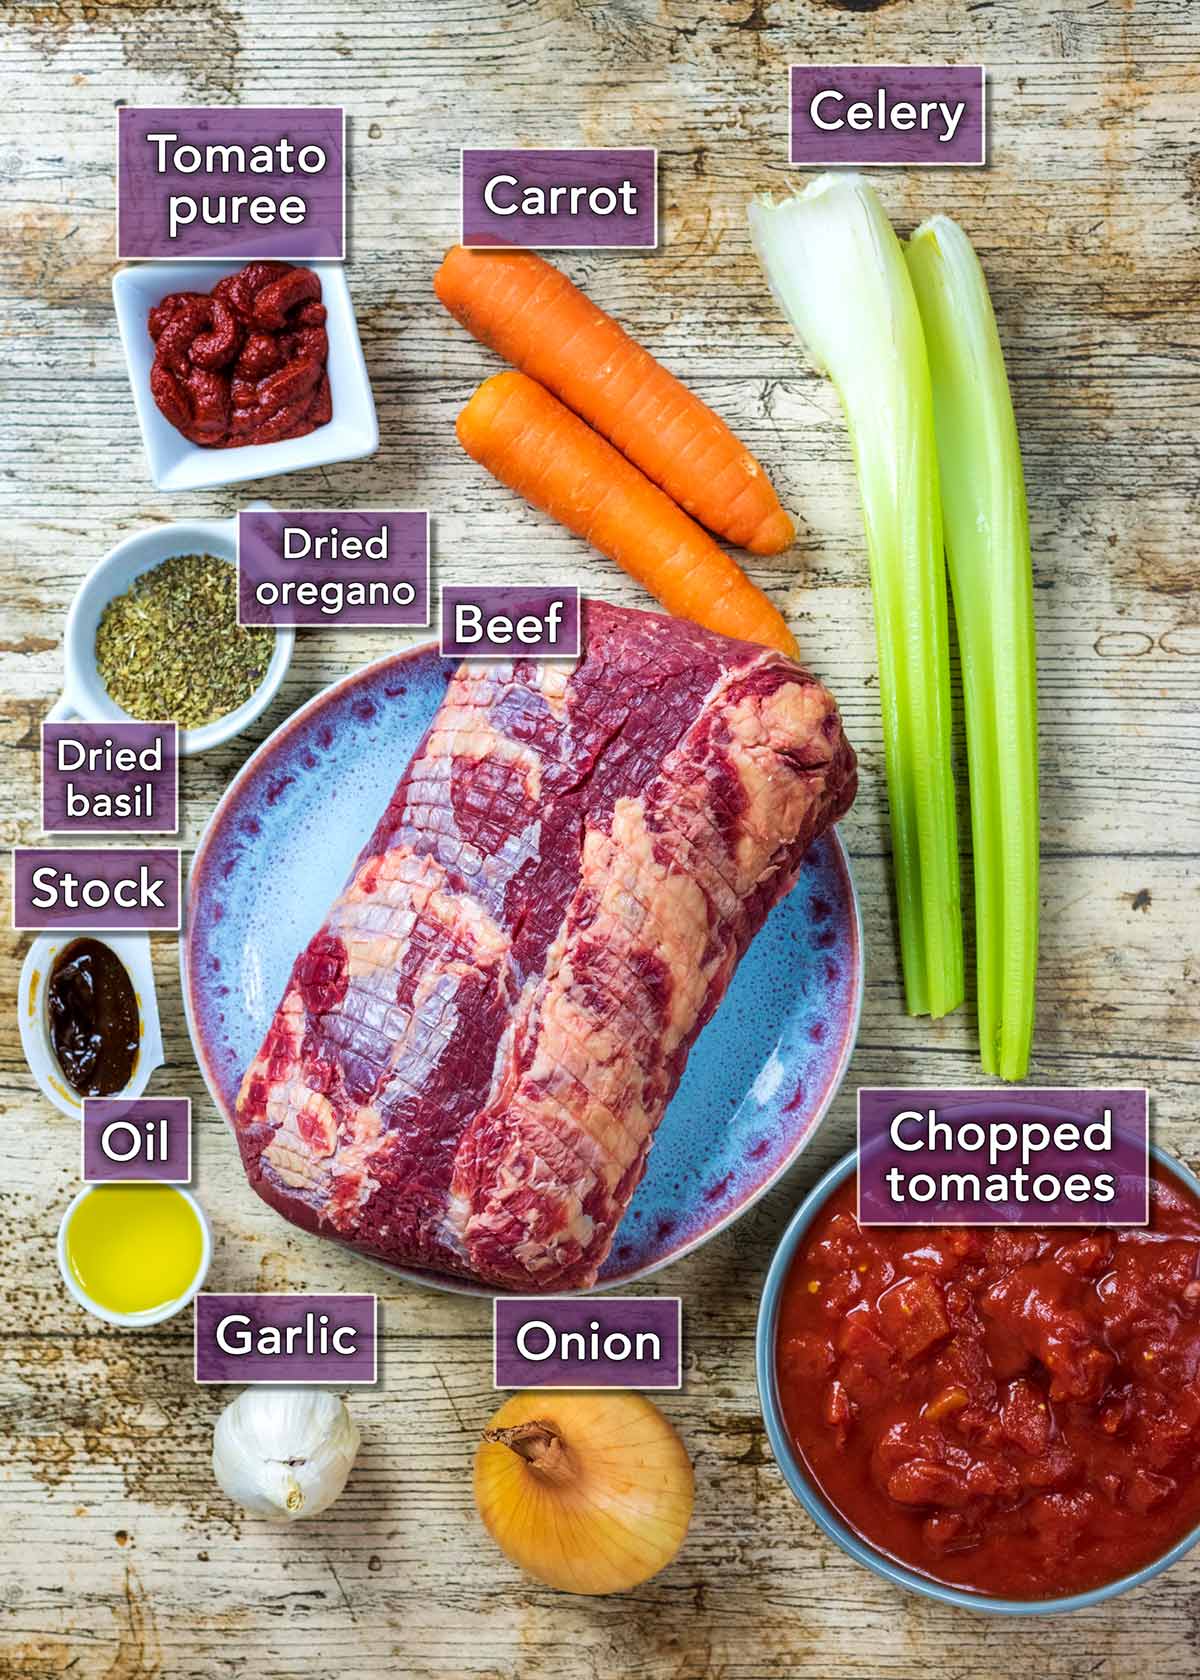 All the ingredients needed for this recipe each with a ext overlay label.